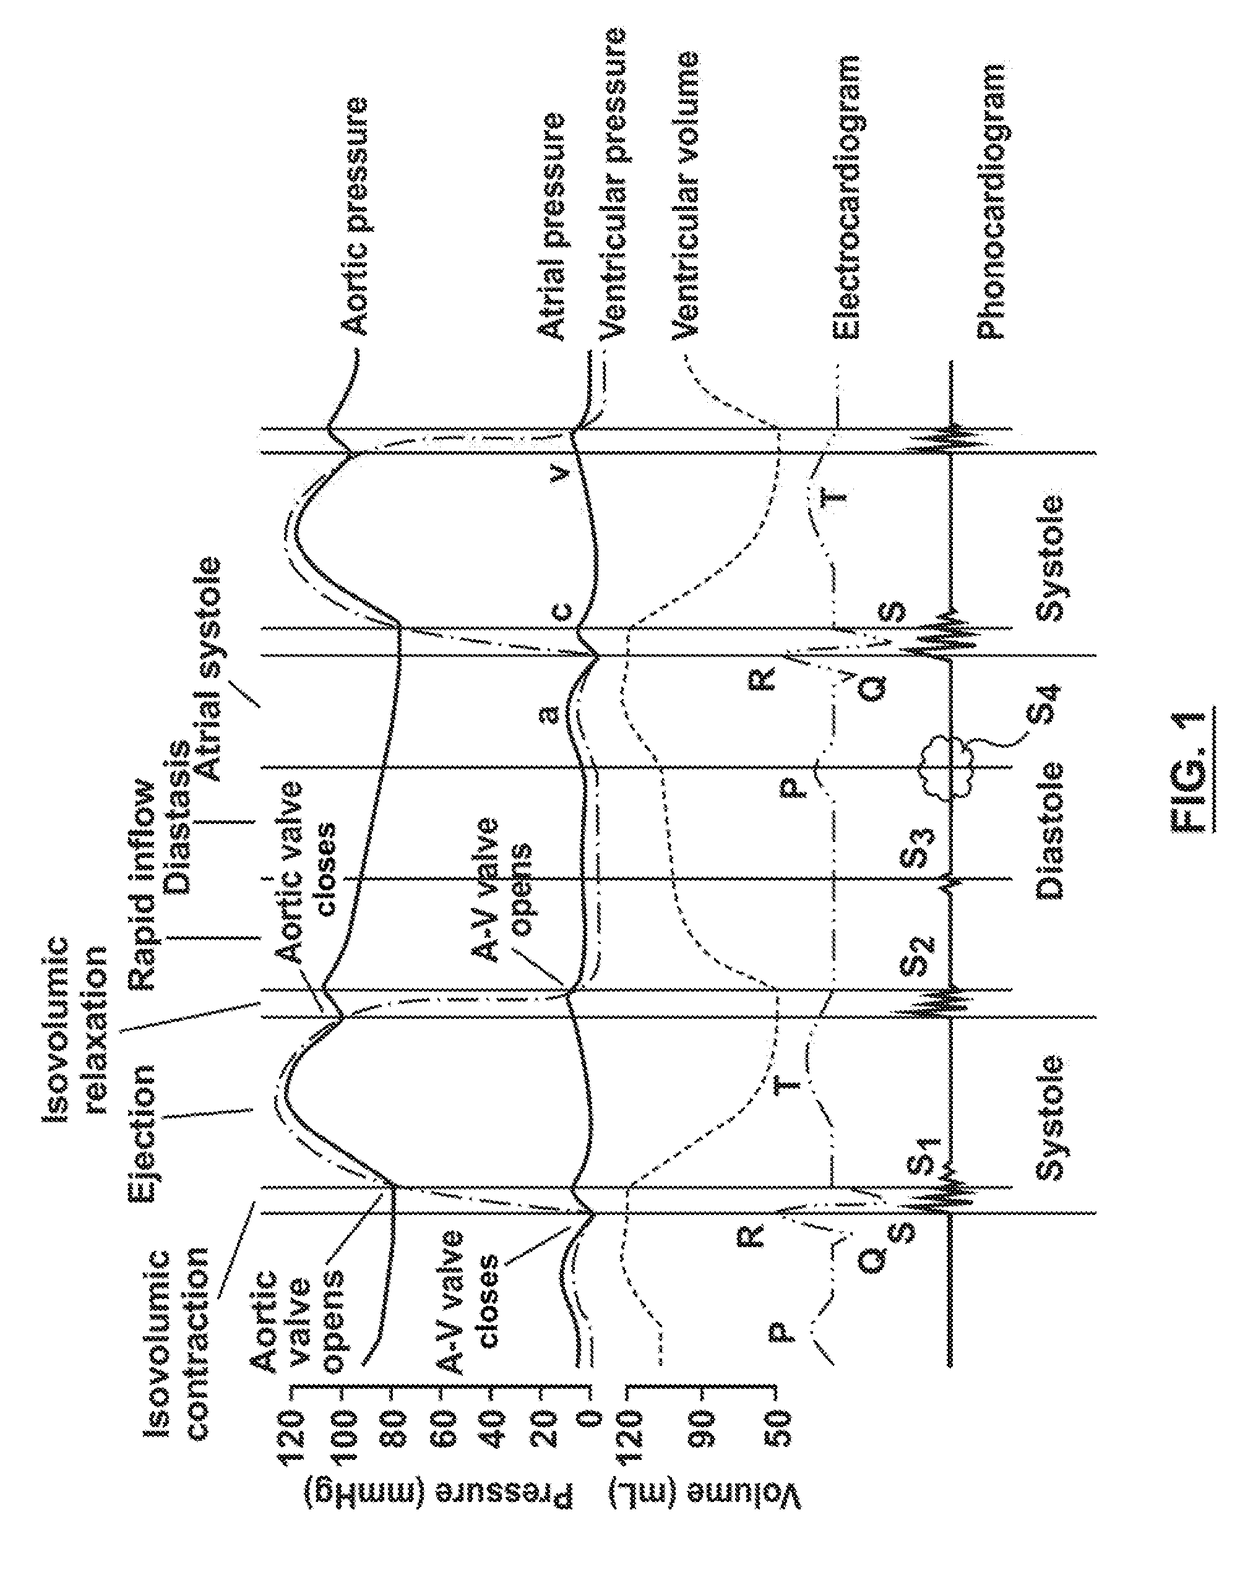 Cardiac monitor system and method for home and telemedicine application